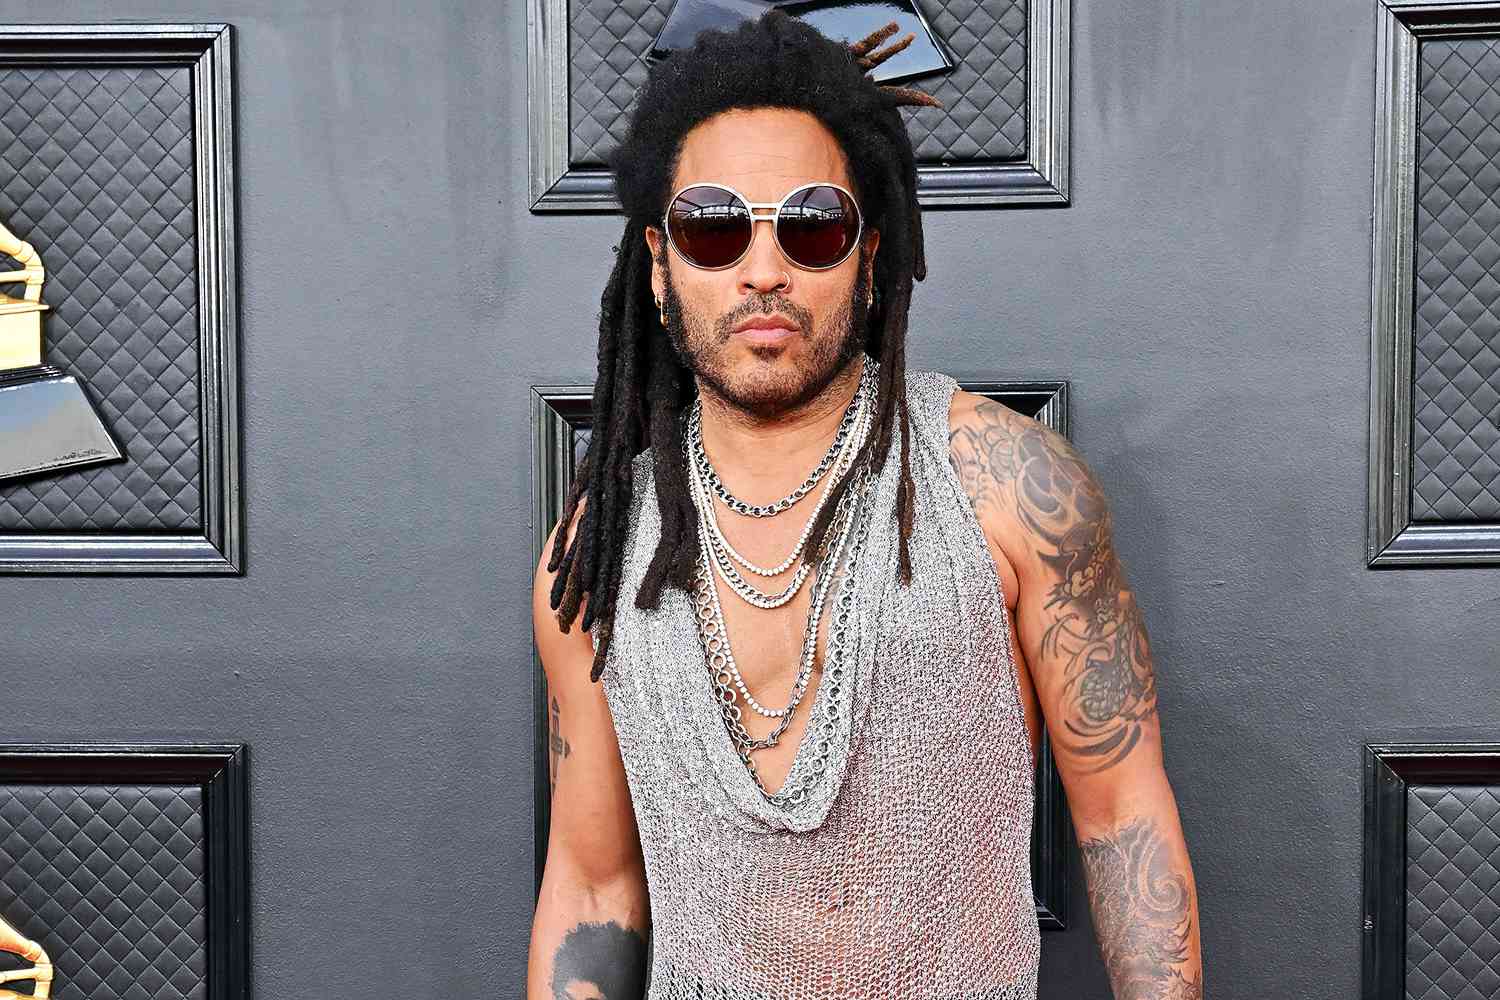 Lenny Kravitz Says He Hasn't Had a Serious Relationship in 9 Years and Is Staying Celibate